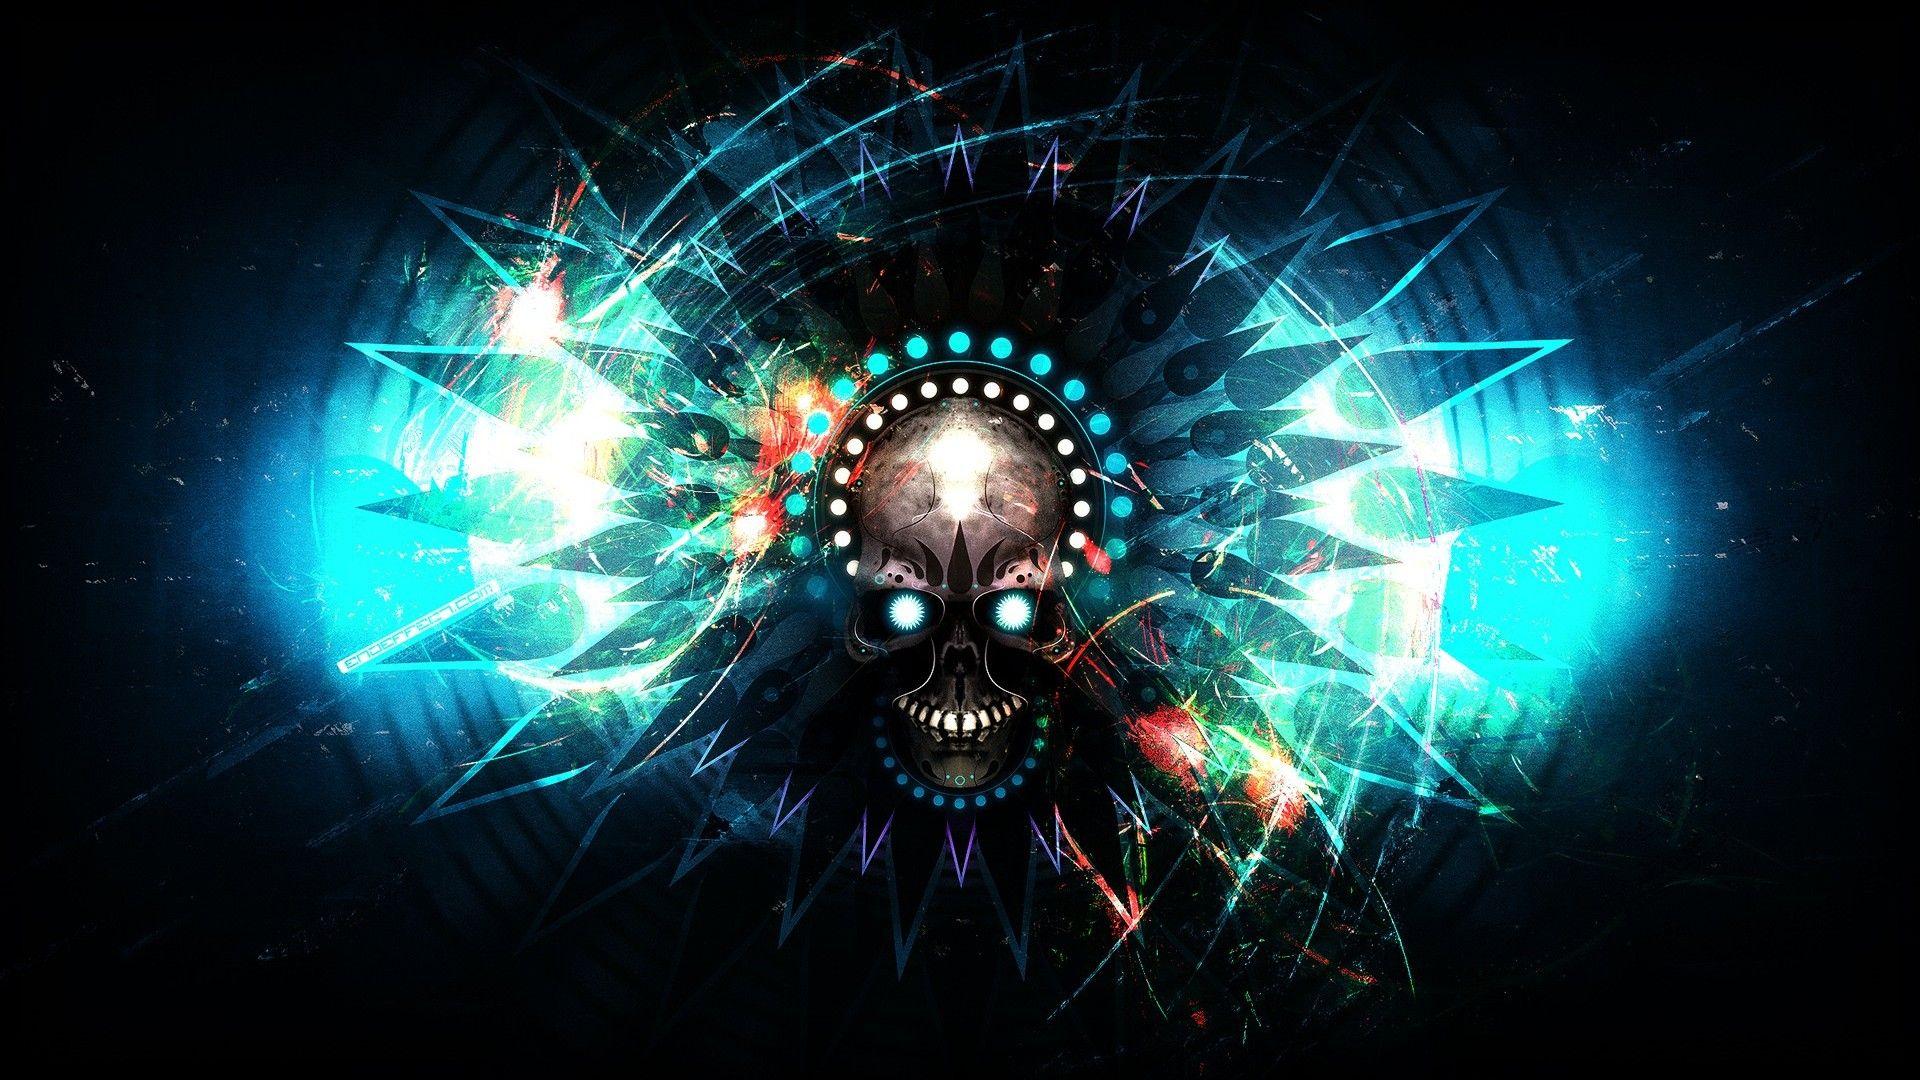 Background Dubstep Wallpaper Gallery